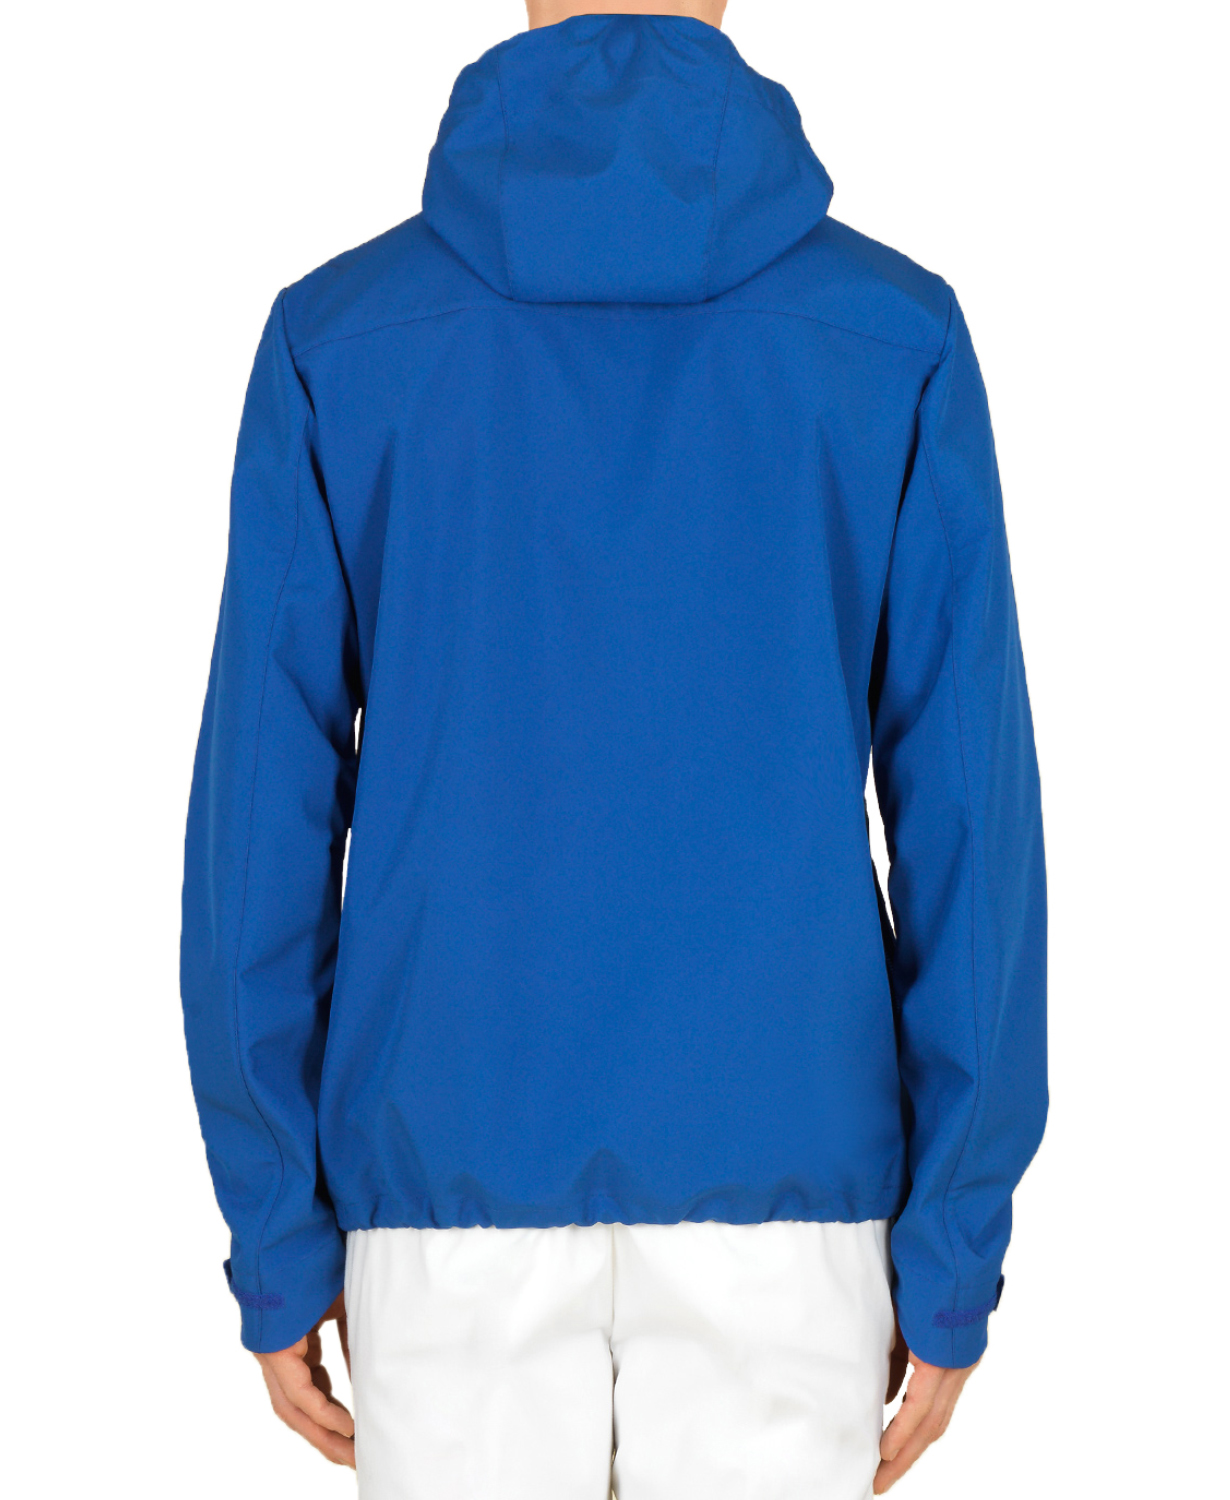 www.couturepoint.com-gucci-mens-electric-blue-hooded-heat-sealed-windbreaker-jacket